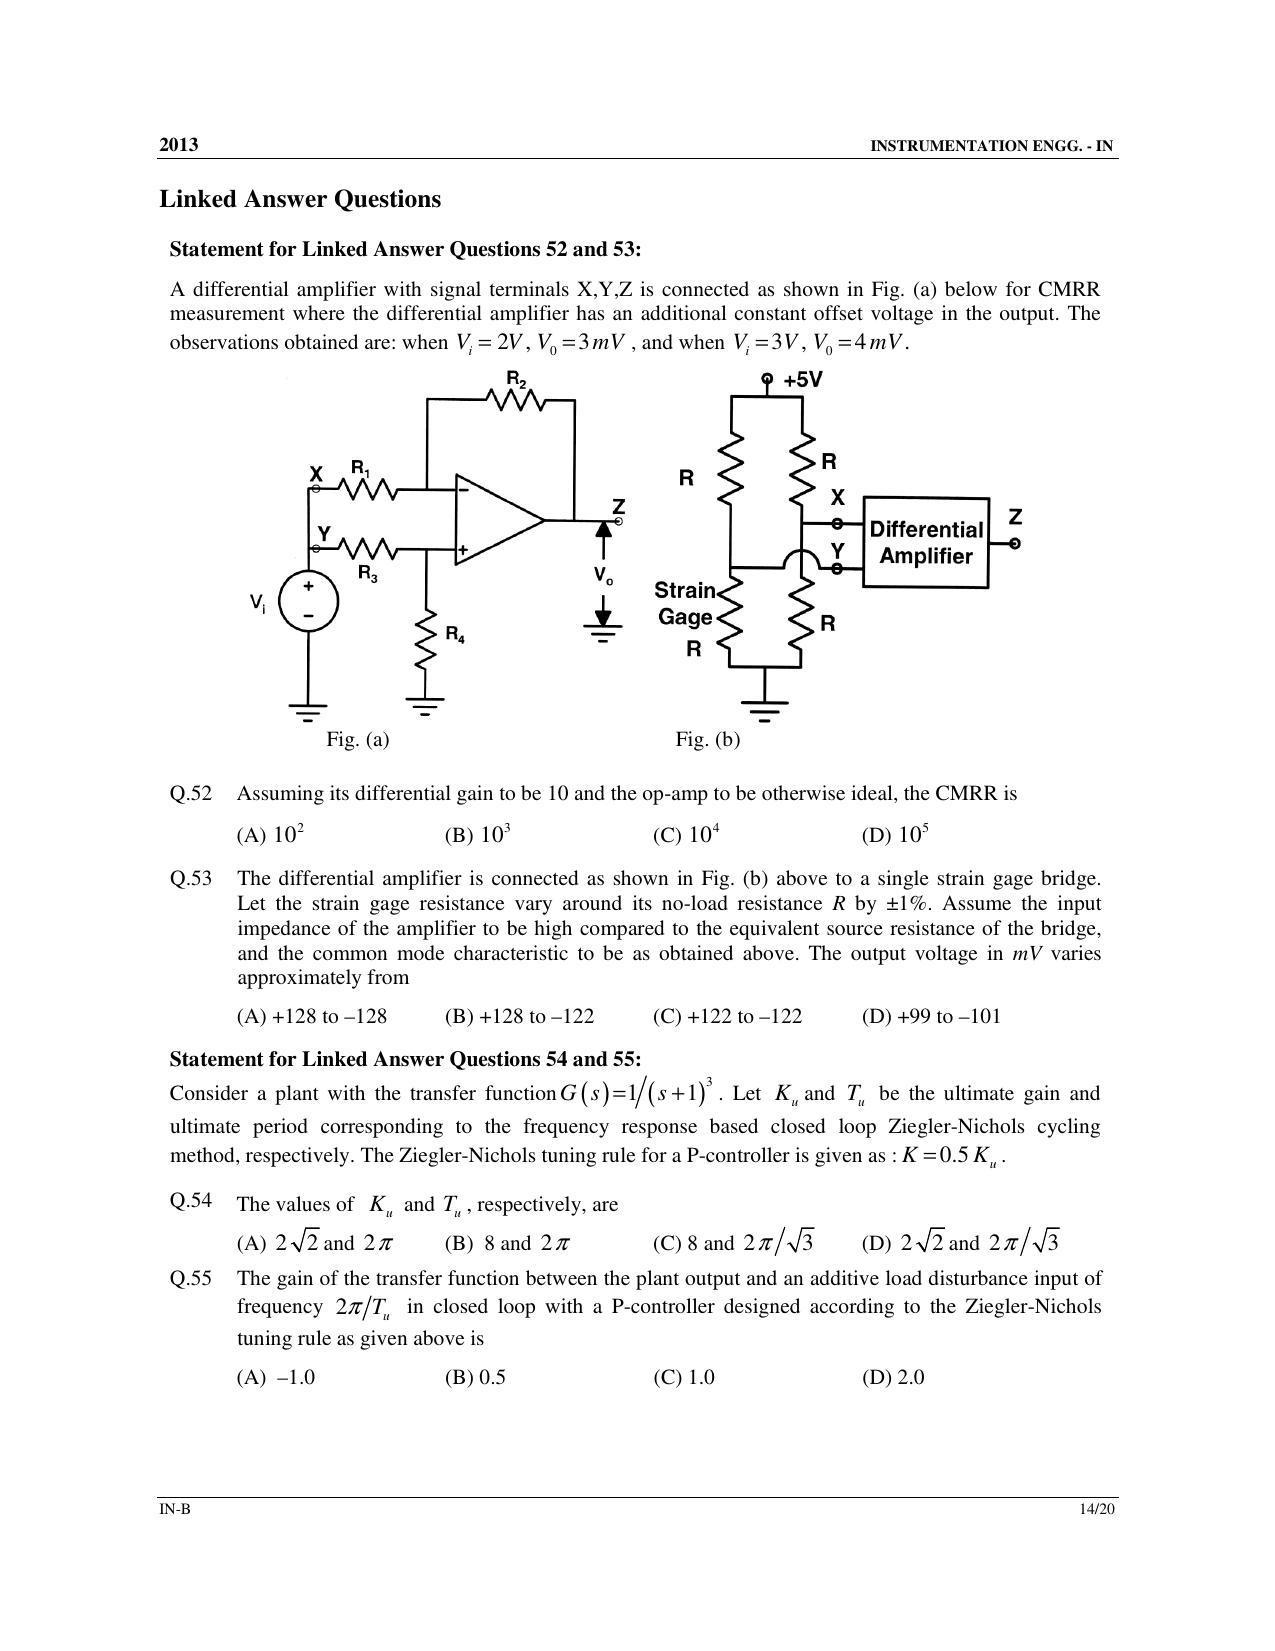 GATE 2013 Instrumentation Engineering (IN) Question Paper with Answer Key - Page 32